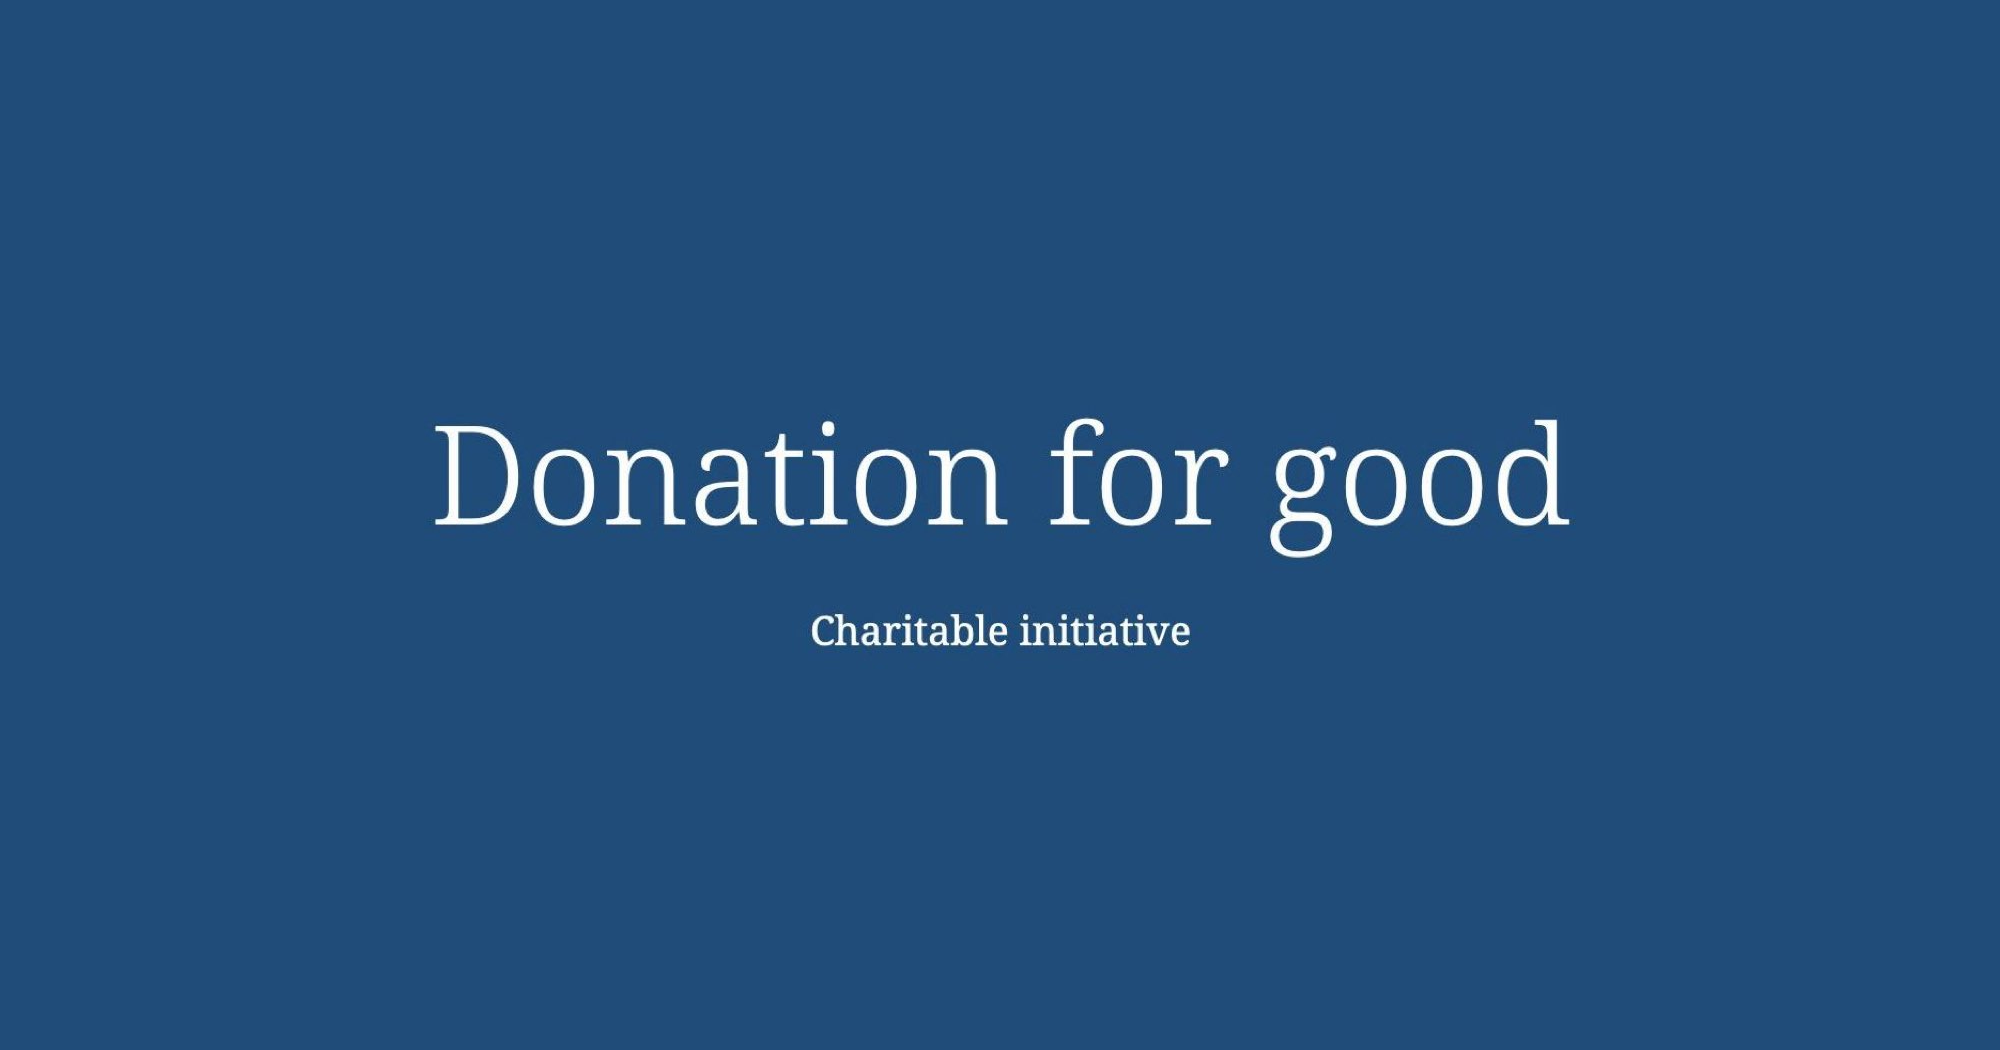 Donation for good